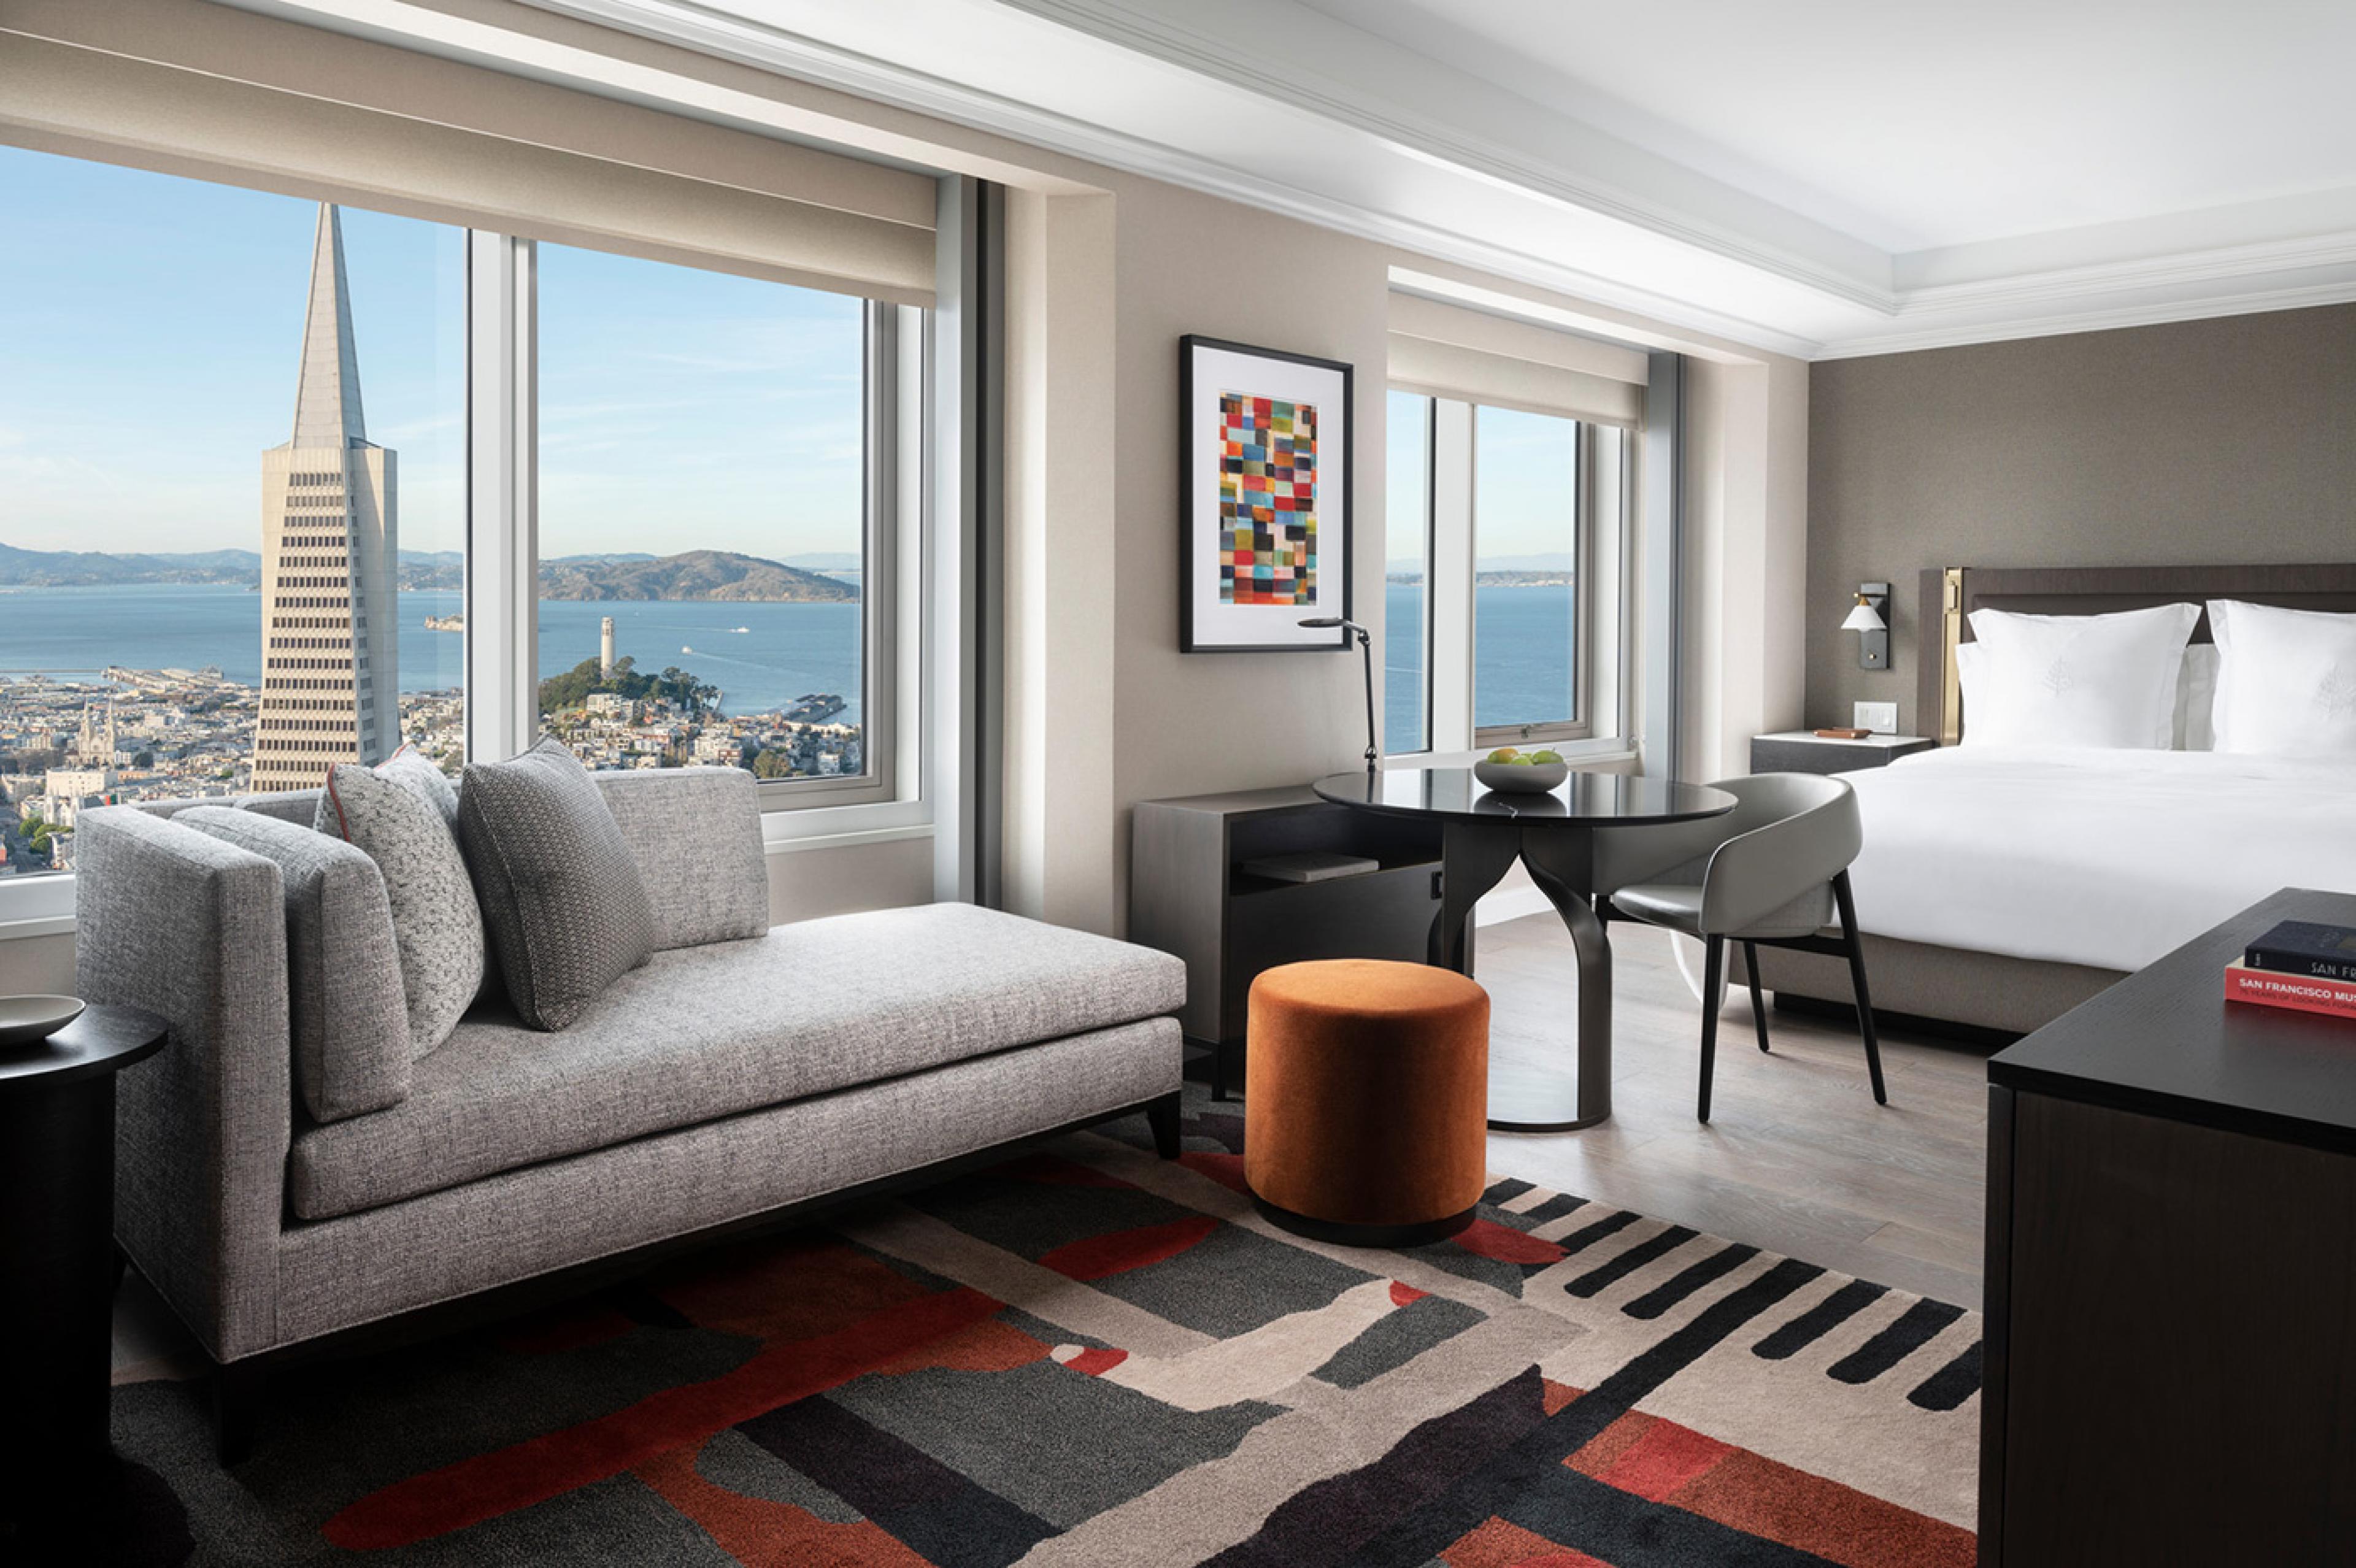 hotel room with gray walls and gray and white furniture with red accent color, with big window looking out to san francisco skyline with transamerica pyramid